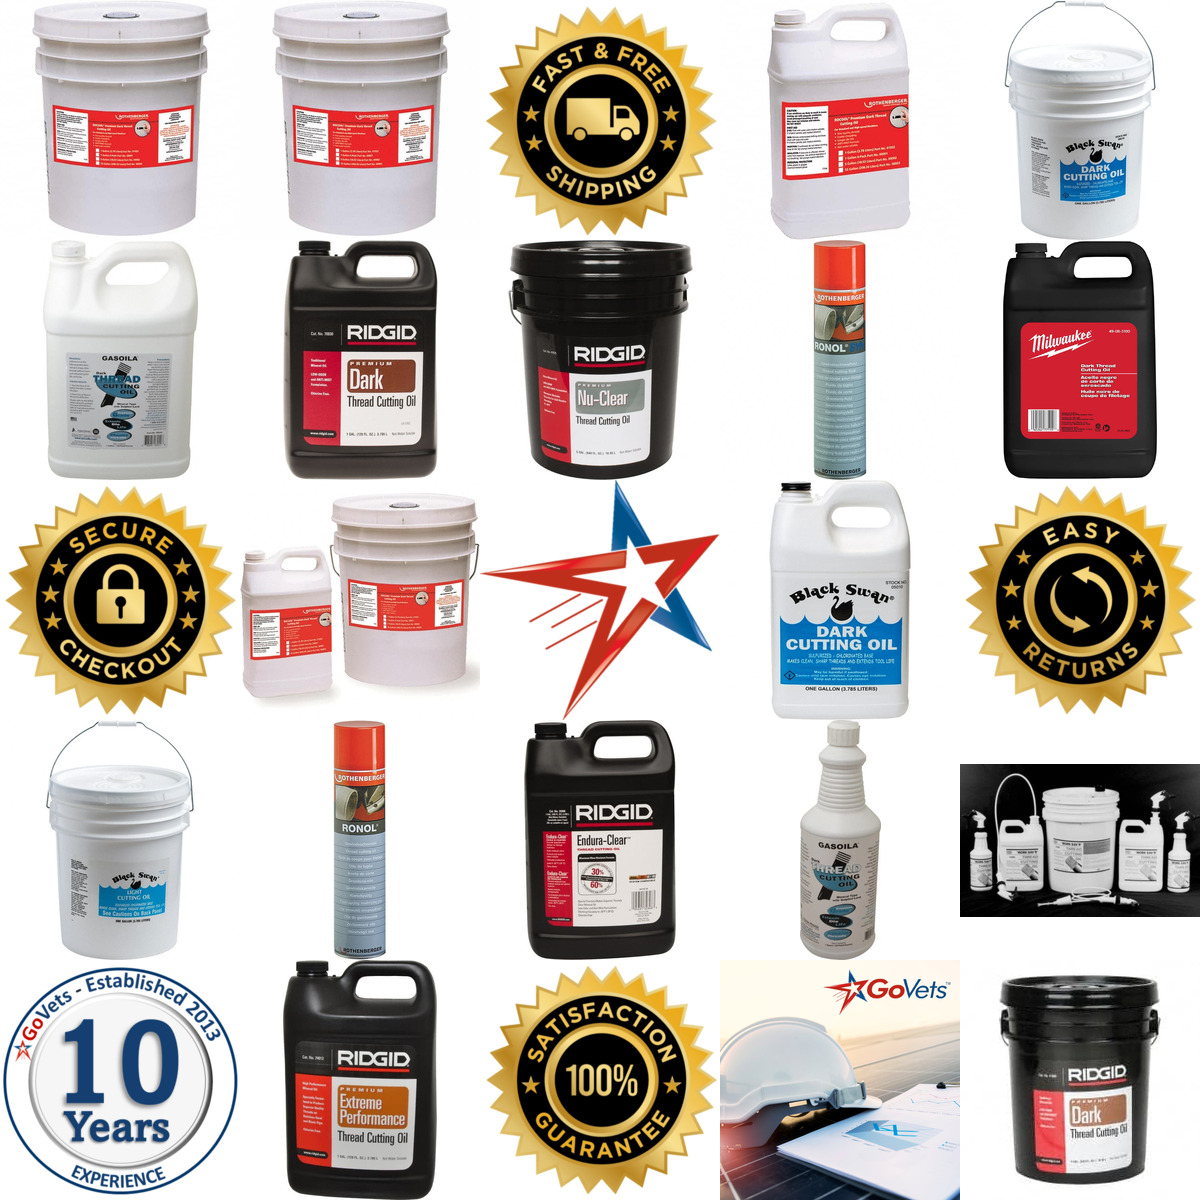 A selection of Pipe Cutting and Threading Oil products on GoVets